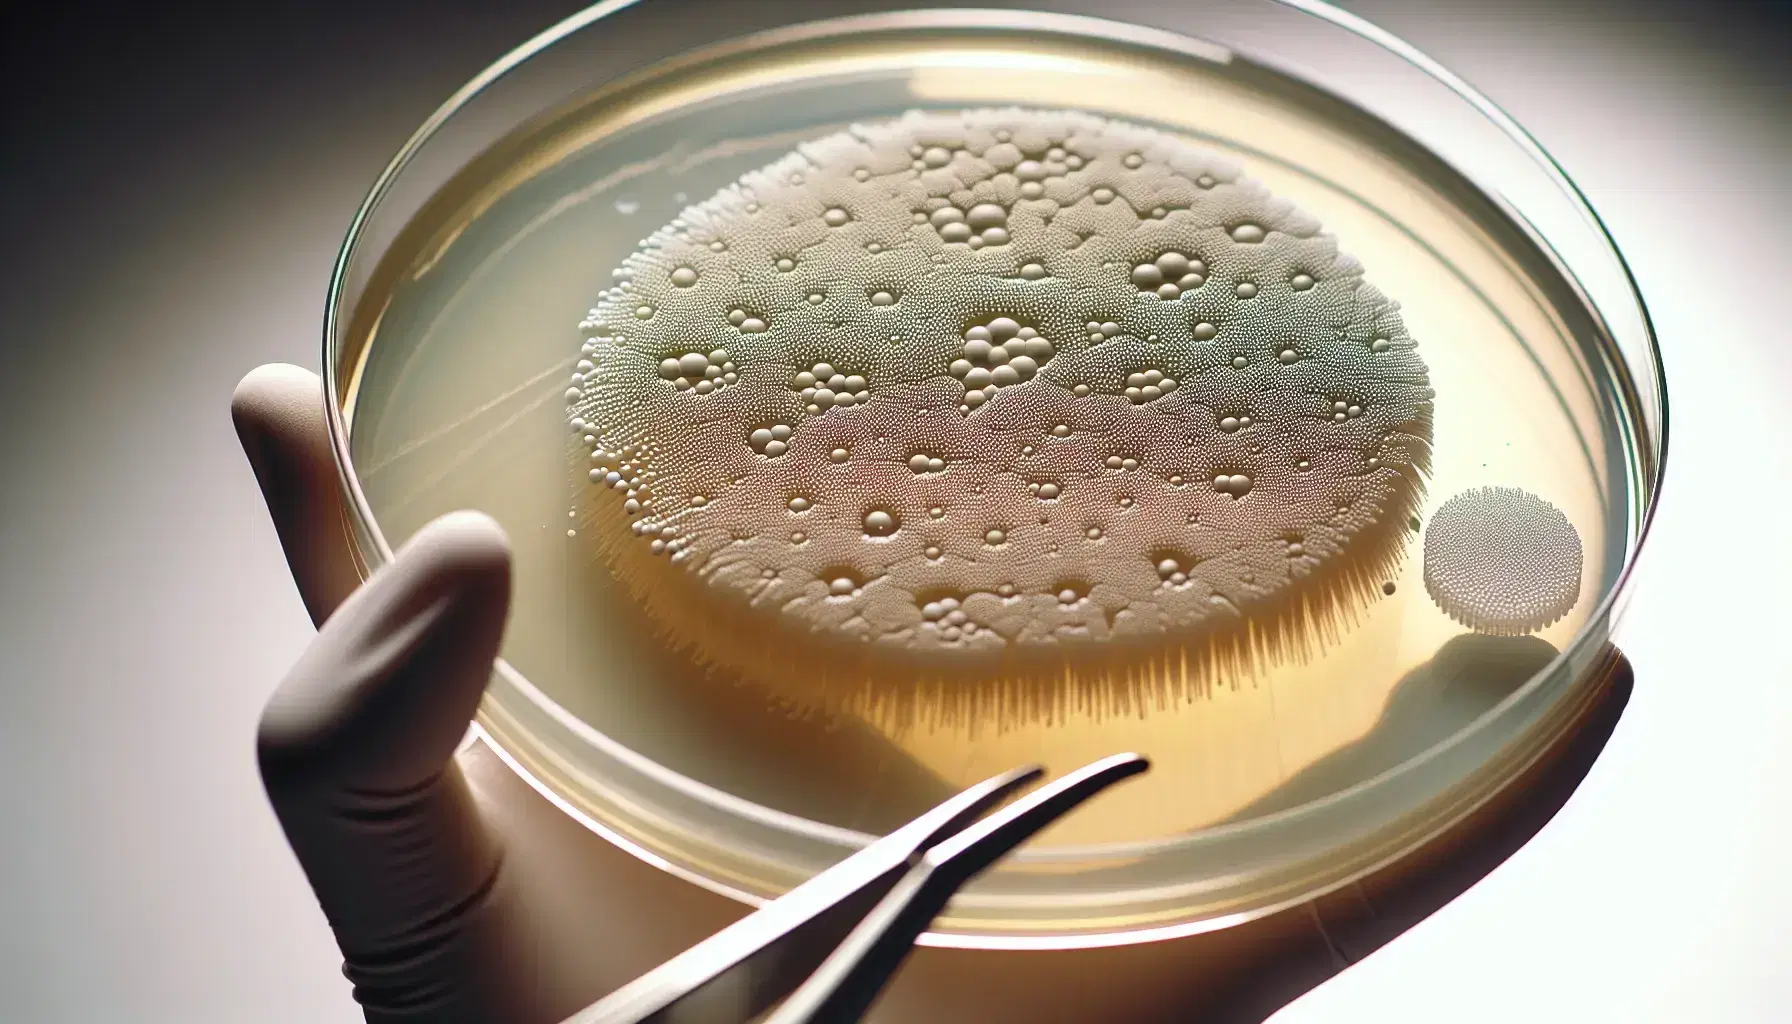 Close-up view of a creamy white bacterial colony on beige agar in a petri dish, with tweezers holding a white paper disc nearby, in a blurred lab setting.